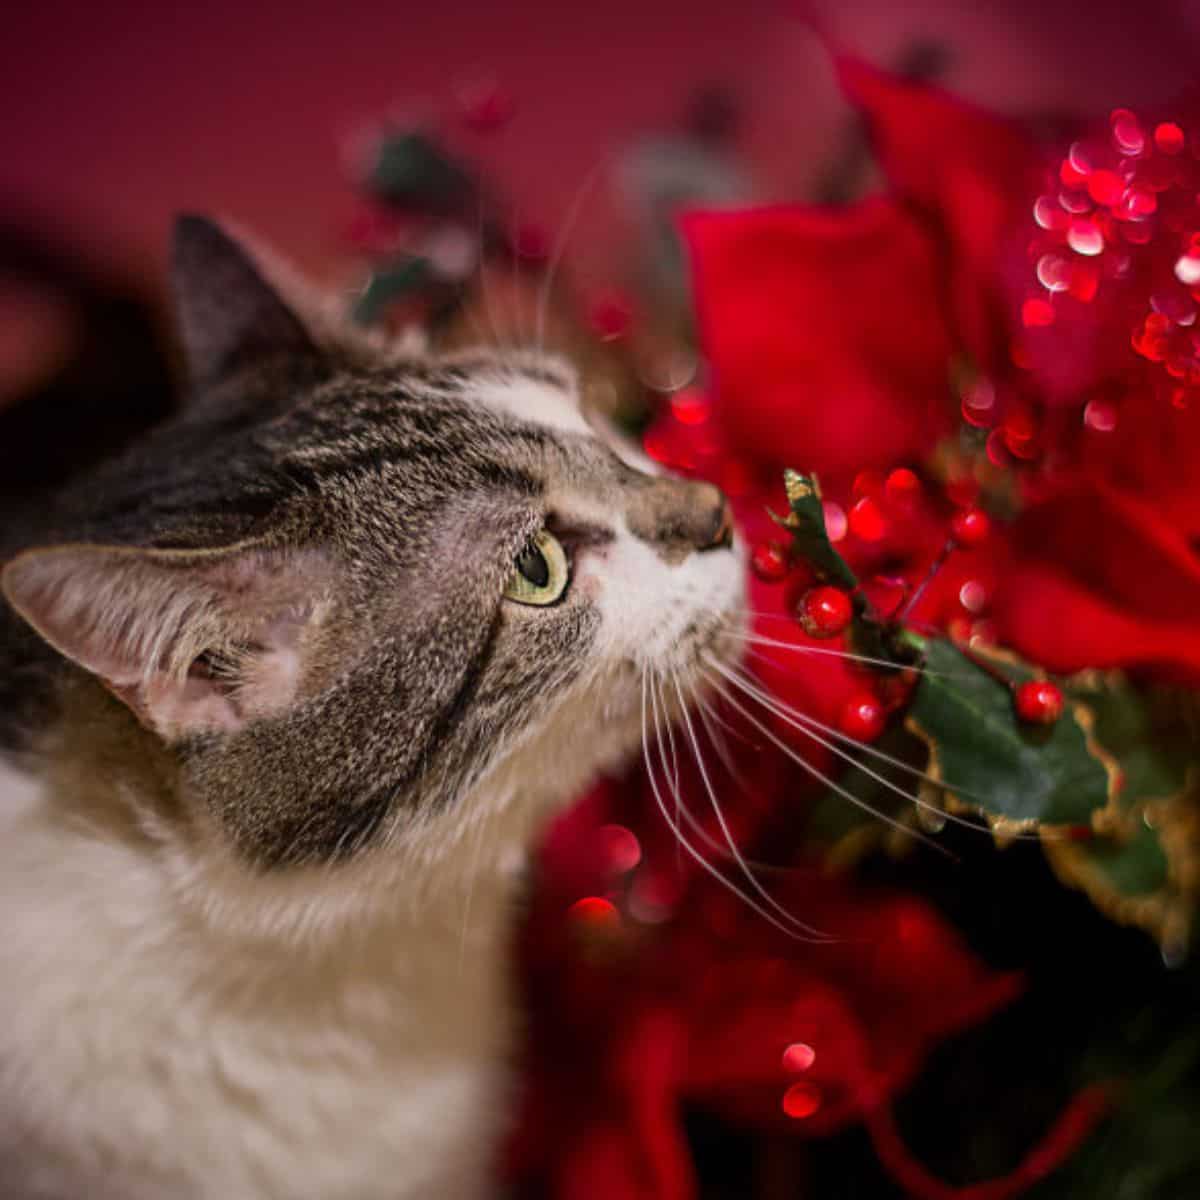 the cat sniffs the red berries